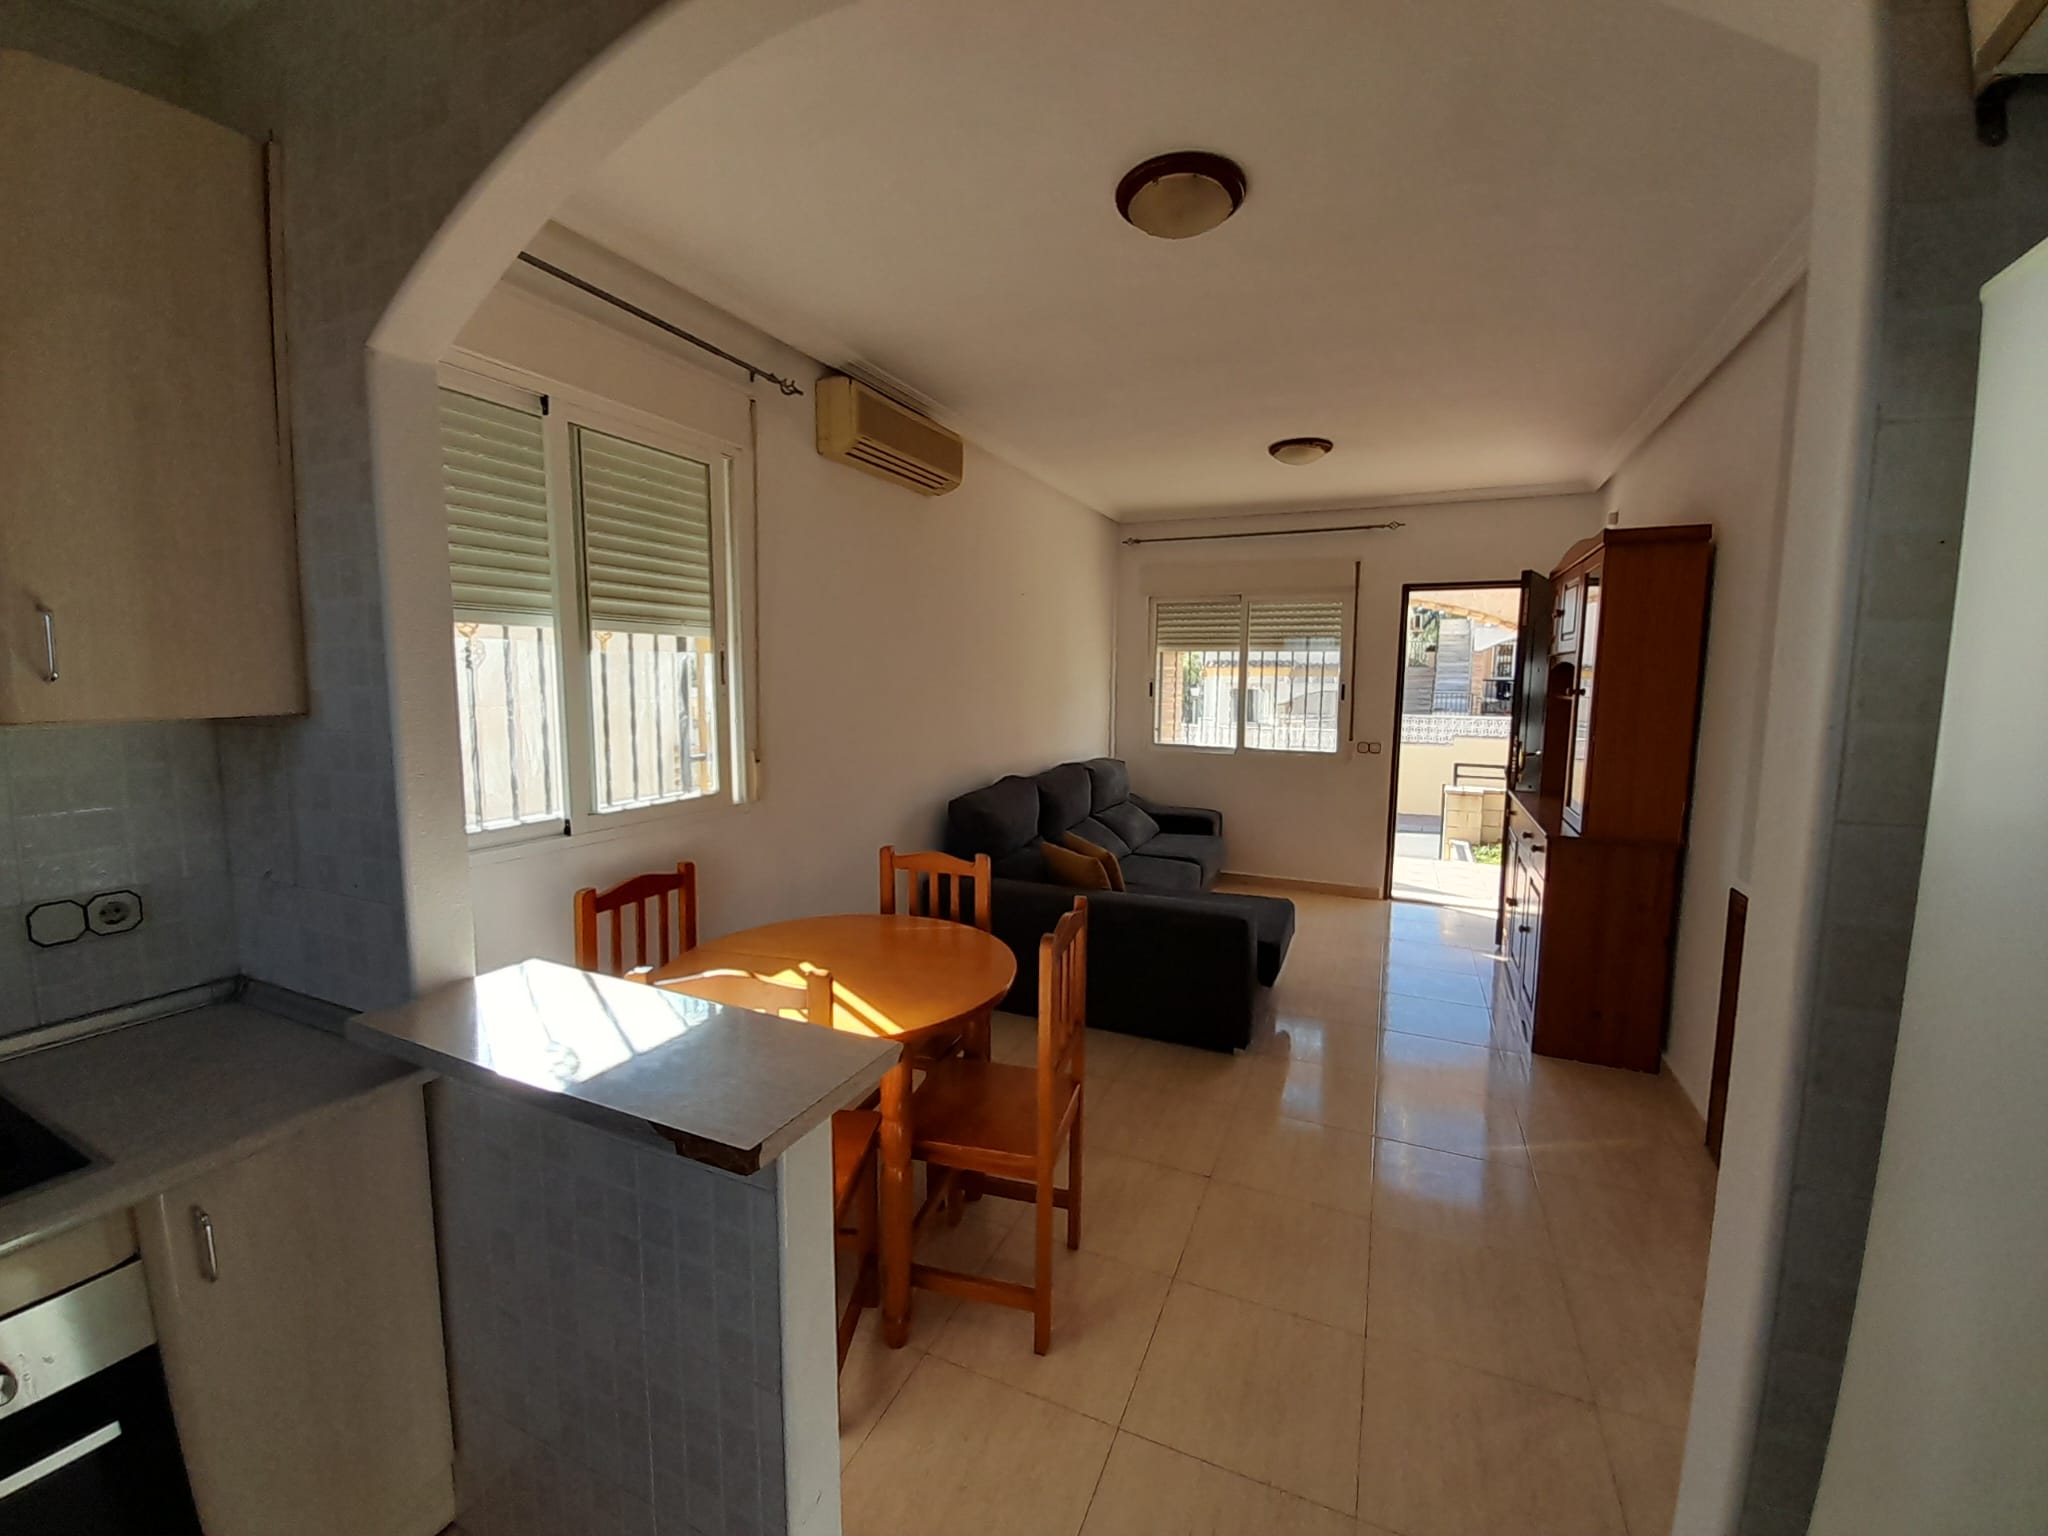 HOUSE FOR SALE IN POLOP - BENIDORM